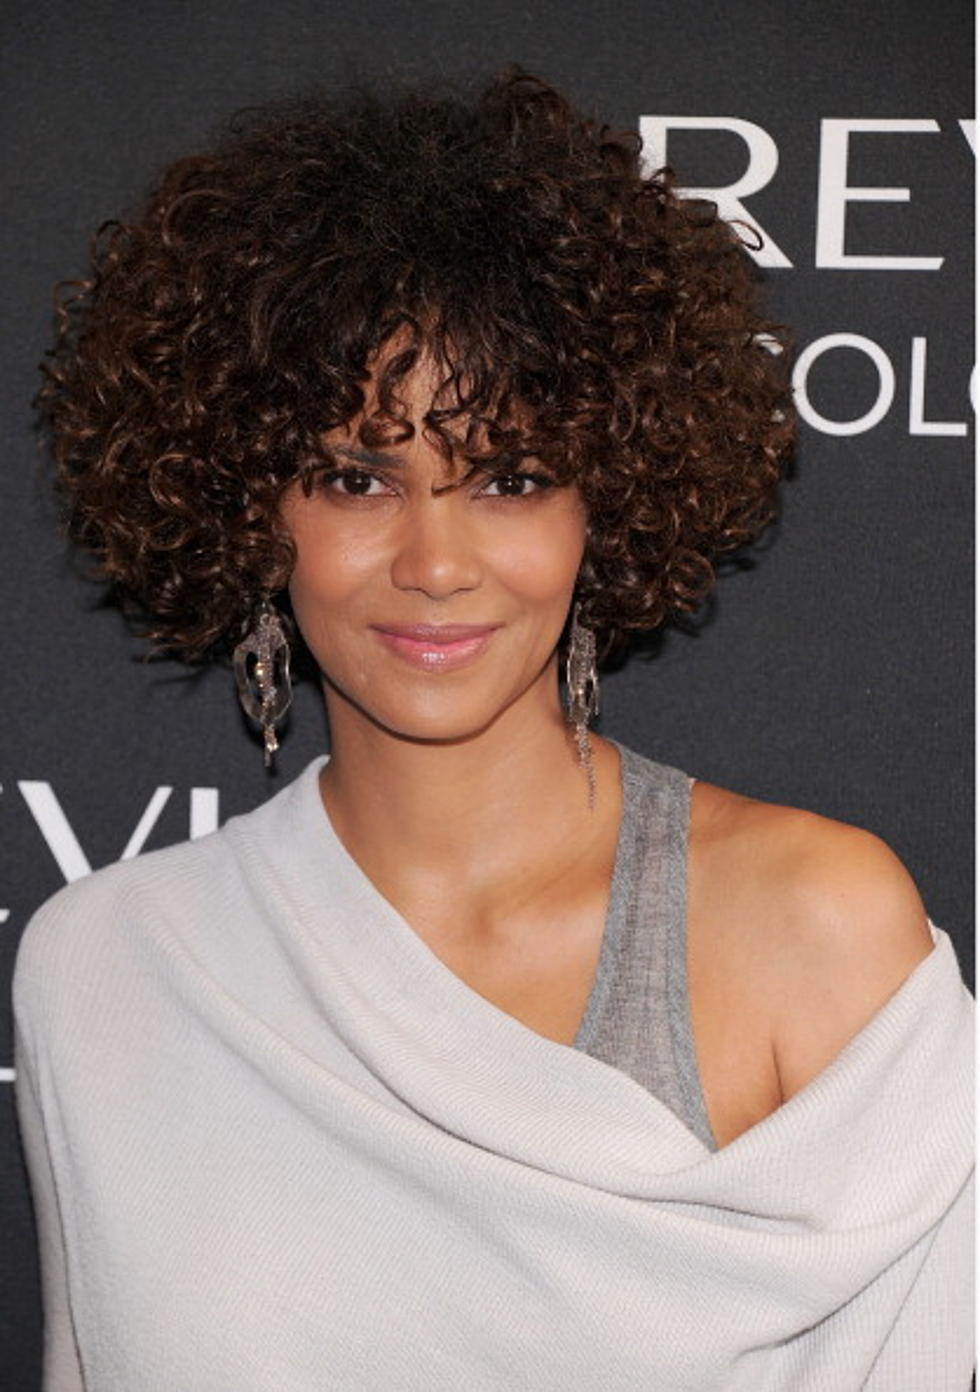 Hollywood Dirt: Halle Berry Rushed to Hospital